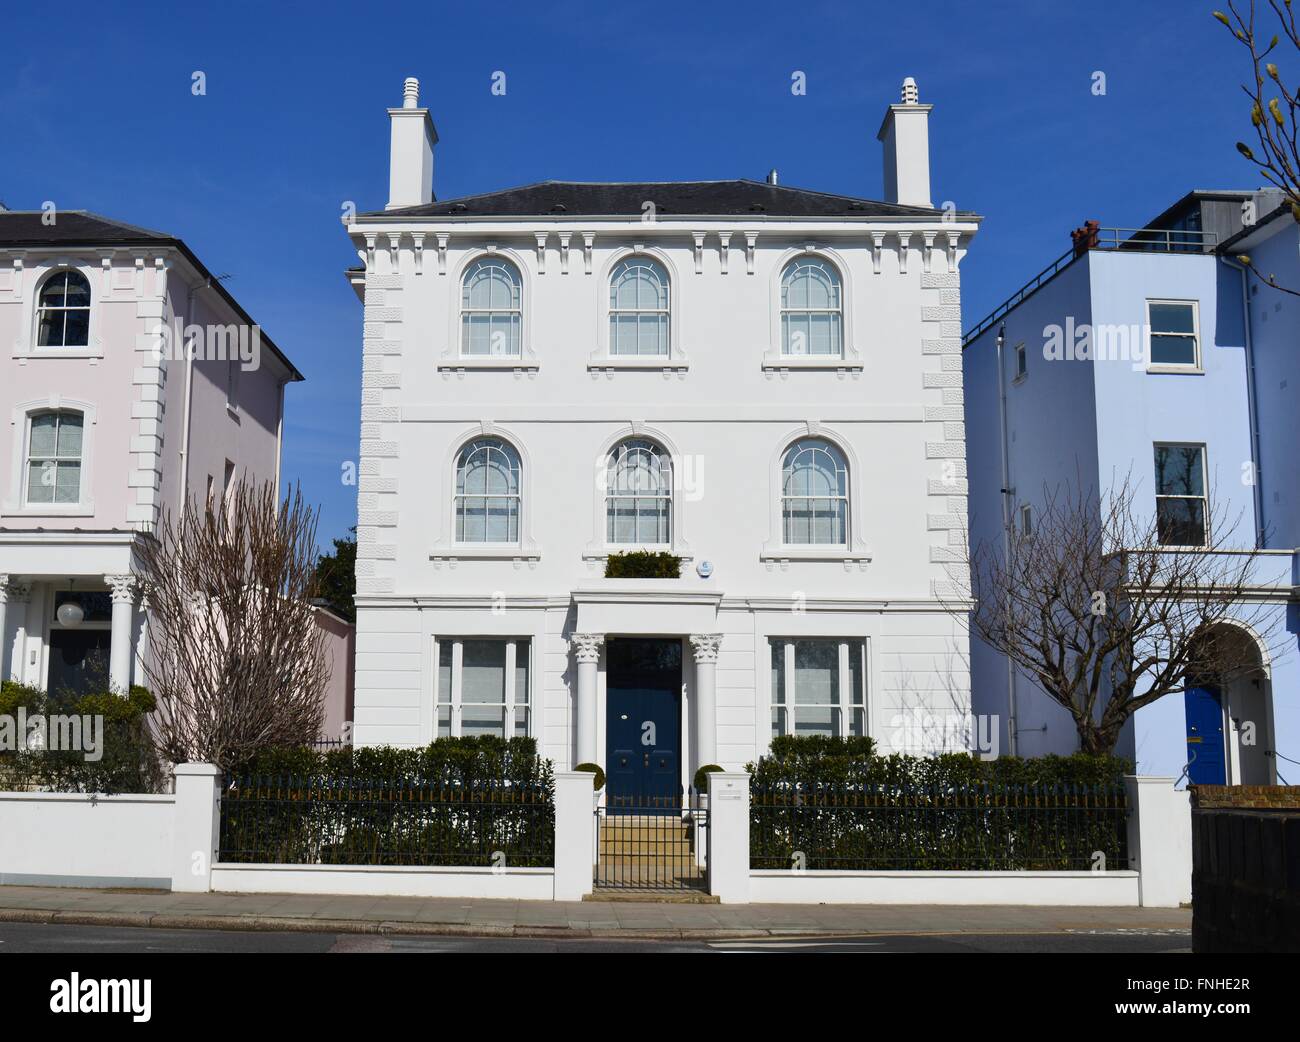 A beautiful white double-fronted Victorian house in a prime residential street in Primrose Hill, London UK Stock Photo